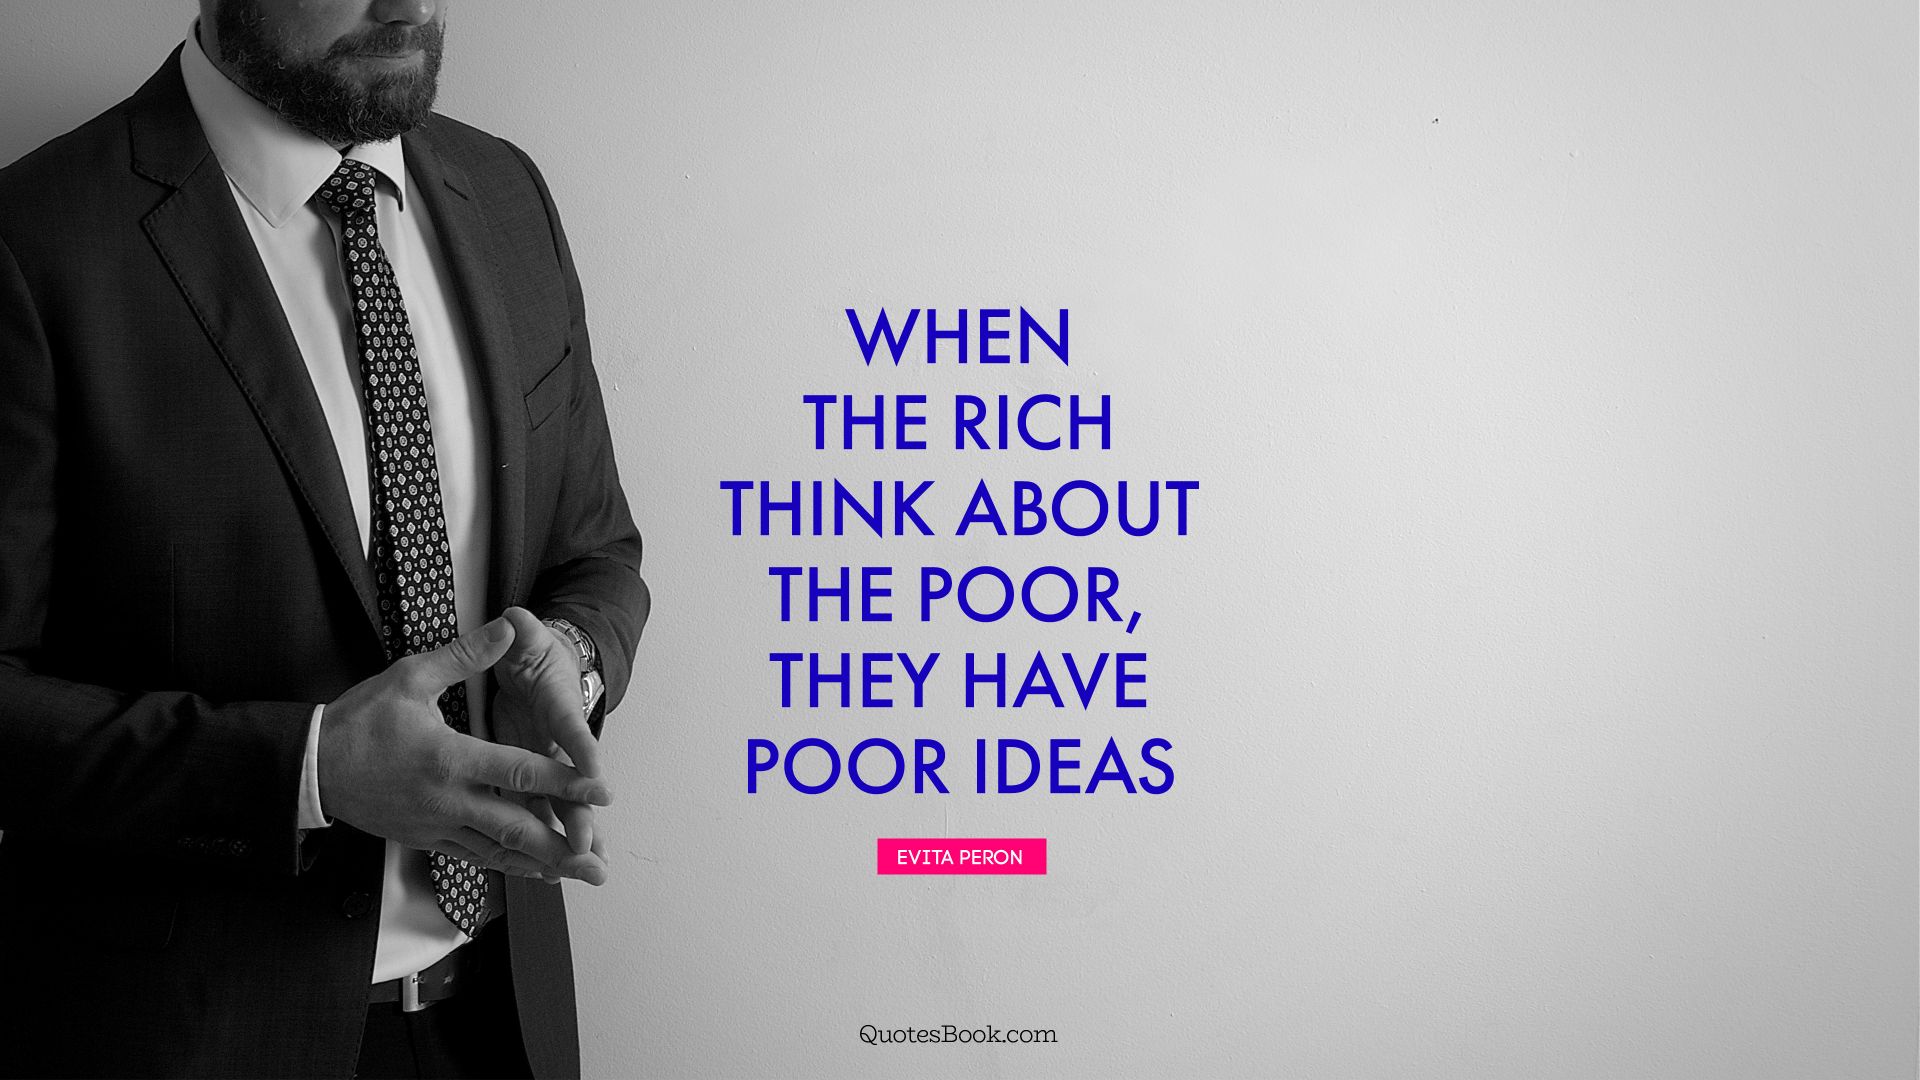 When the rich think about the poor, they have poor ideas. - Quote by Evita Peron